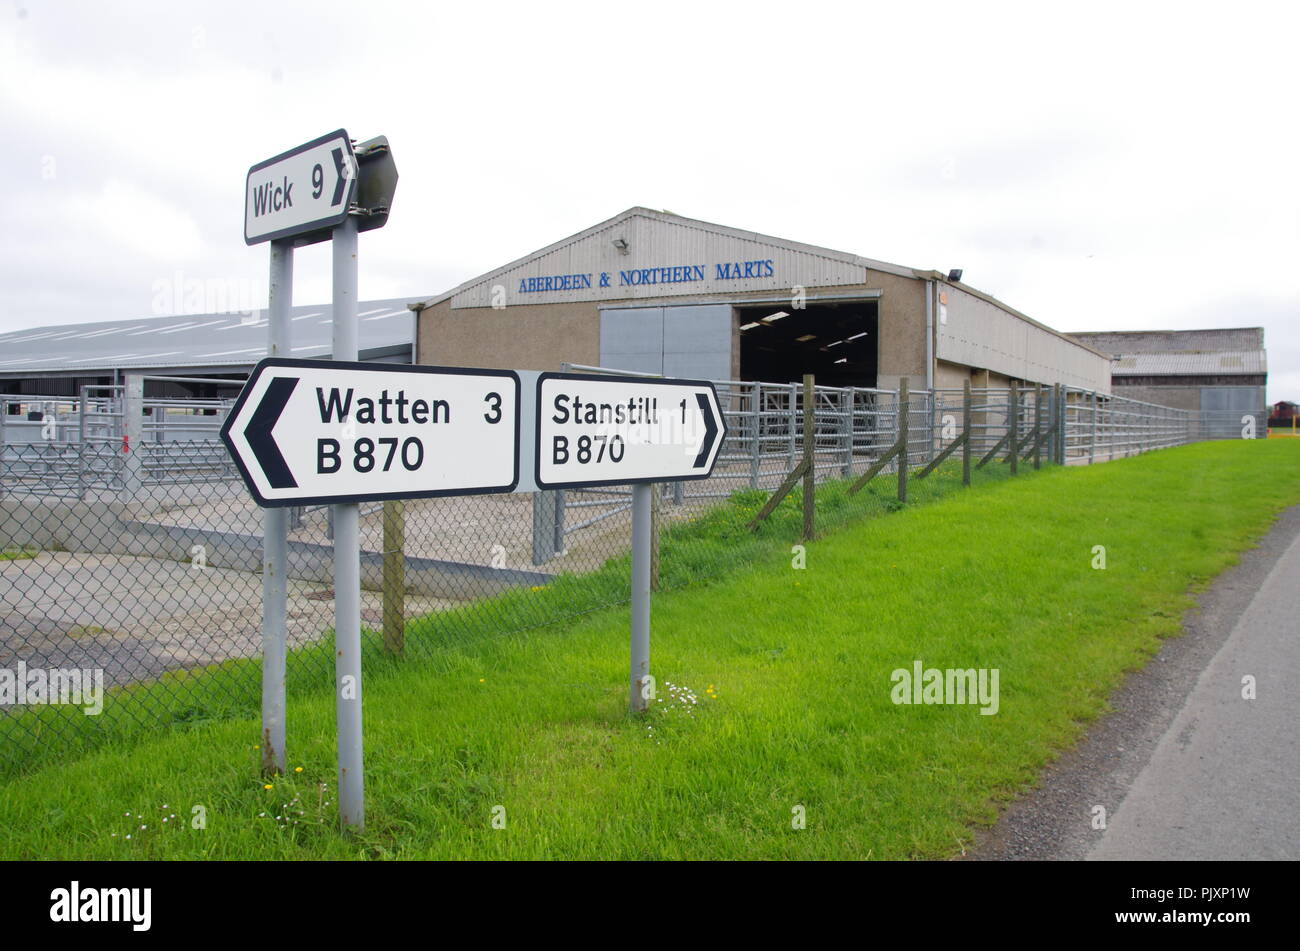 wick and watten sign. John o' groats (Duncansby head) to lands end. End to end trail. Caithness. Highlands. Scotland. UK Stock Photo